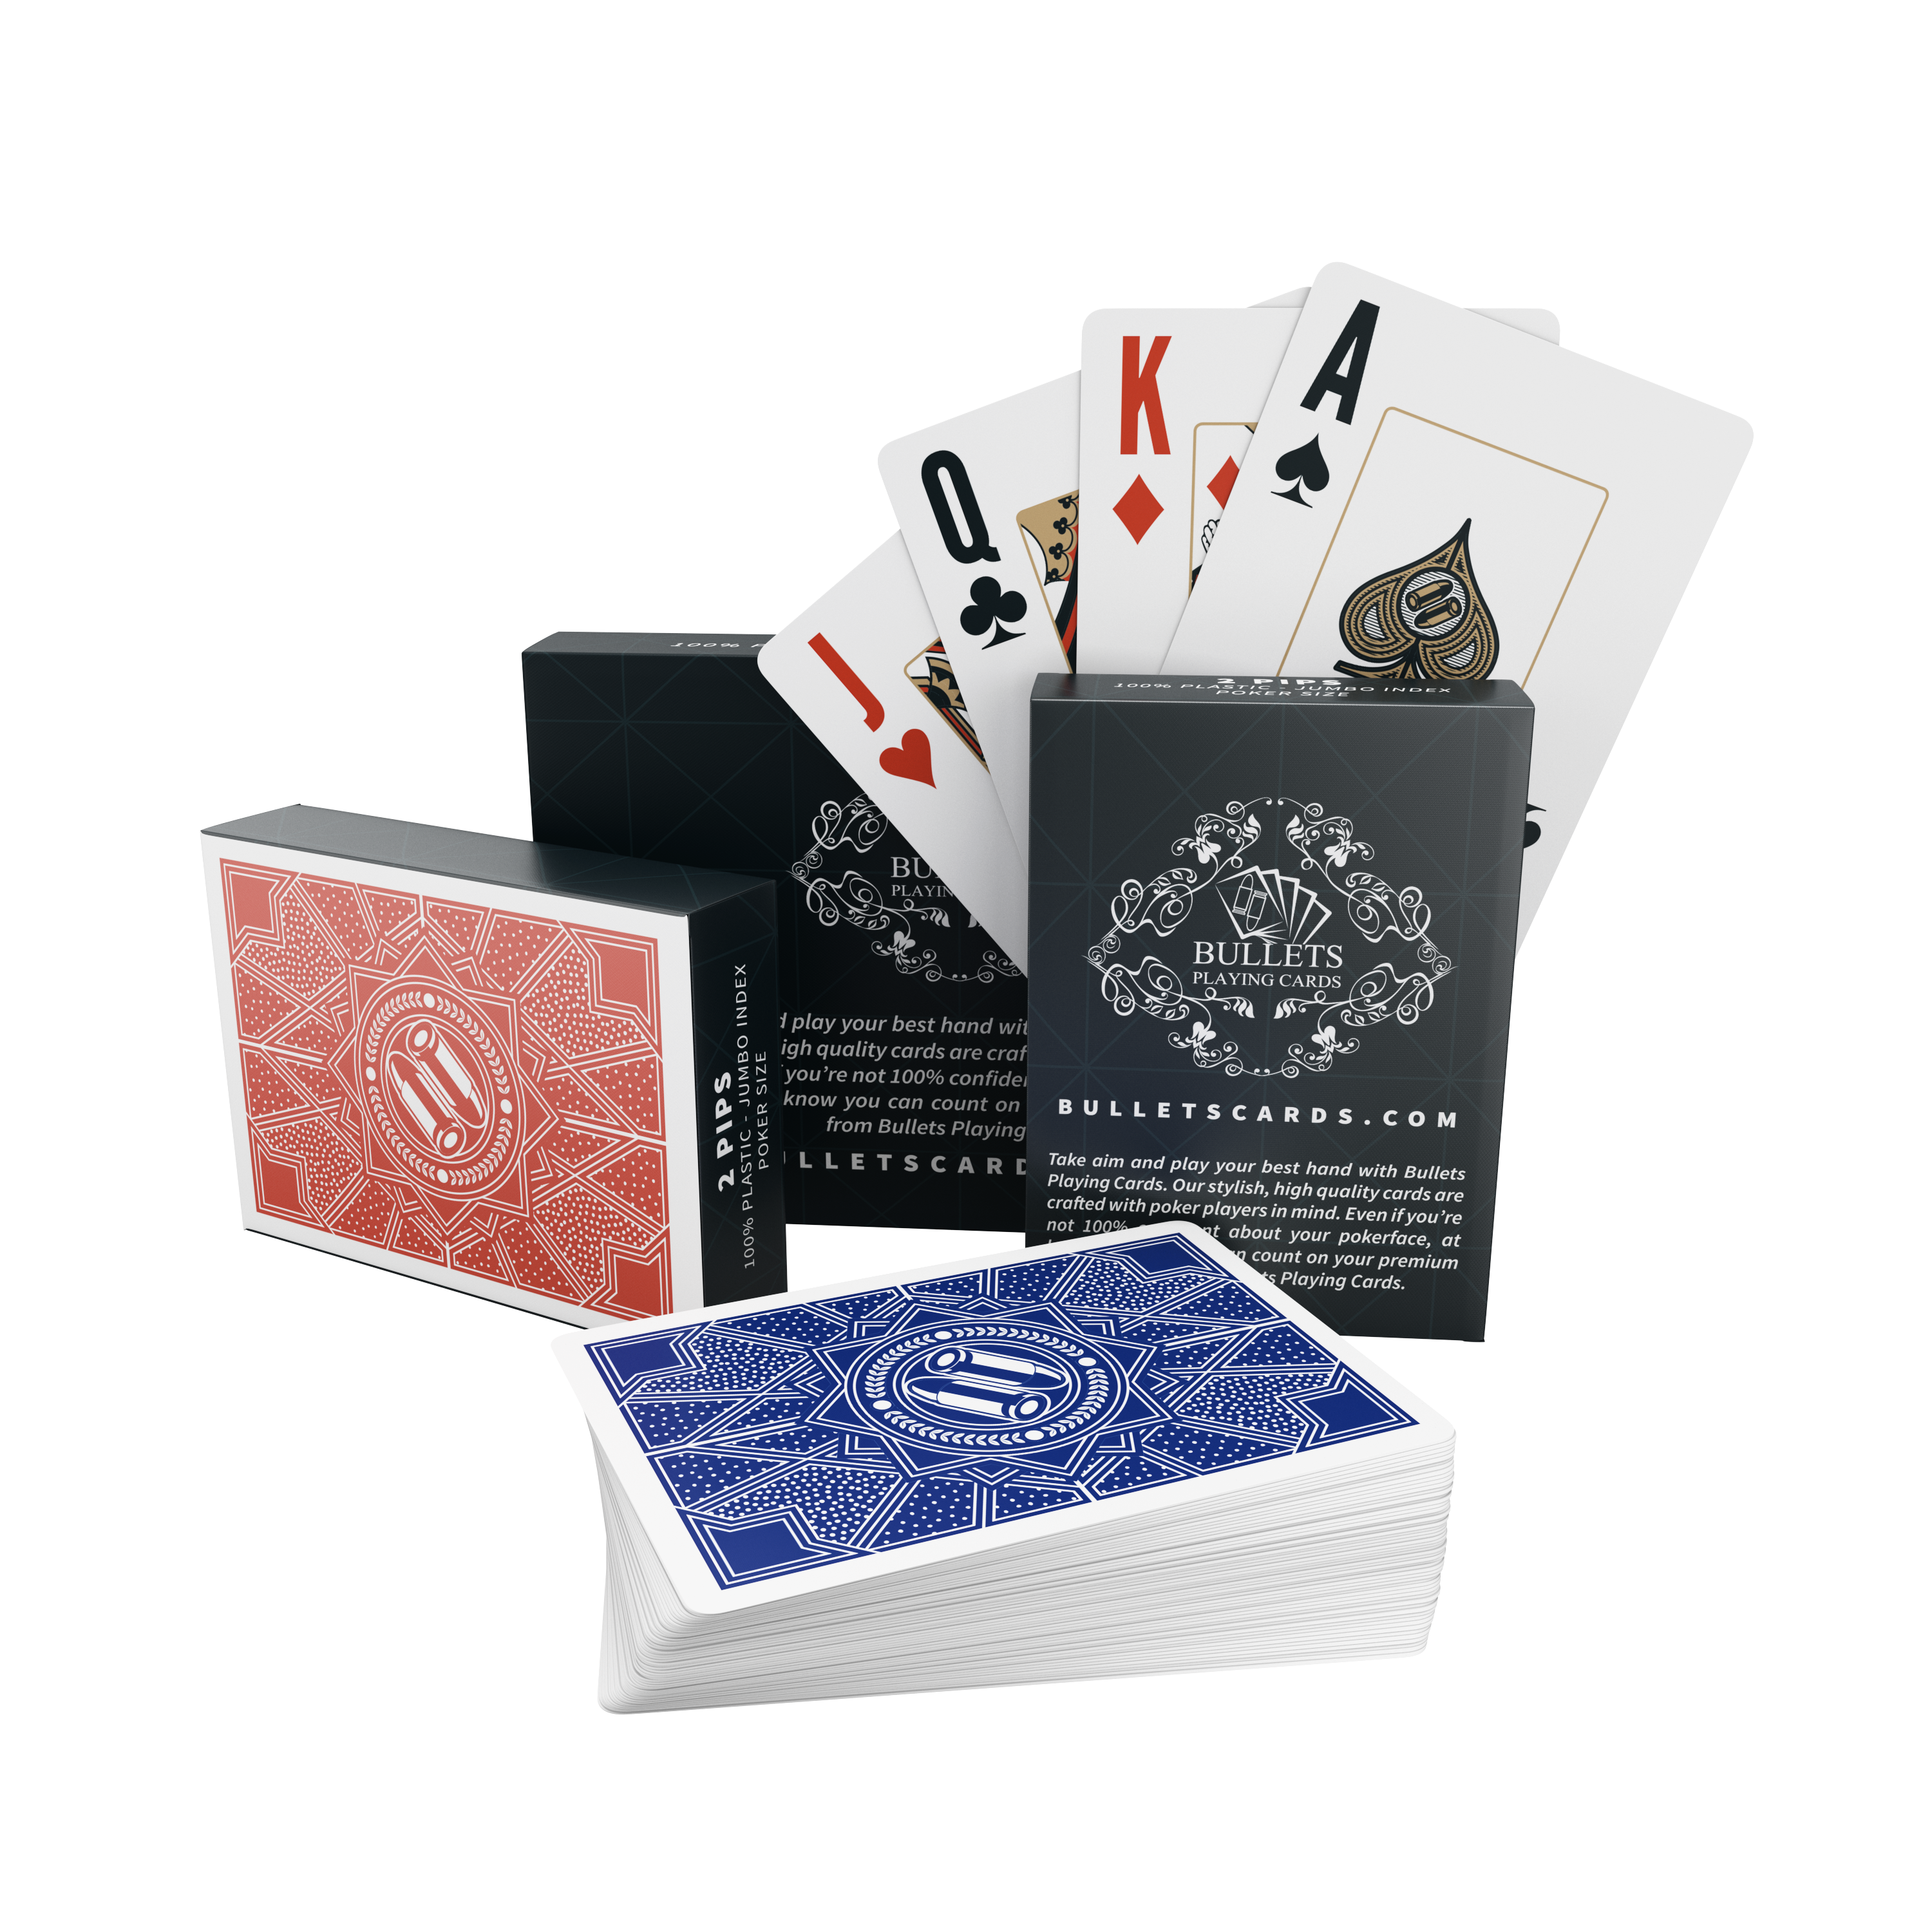 Choosing the right poker chips – Bullets Playing Cards